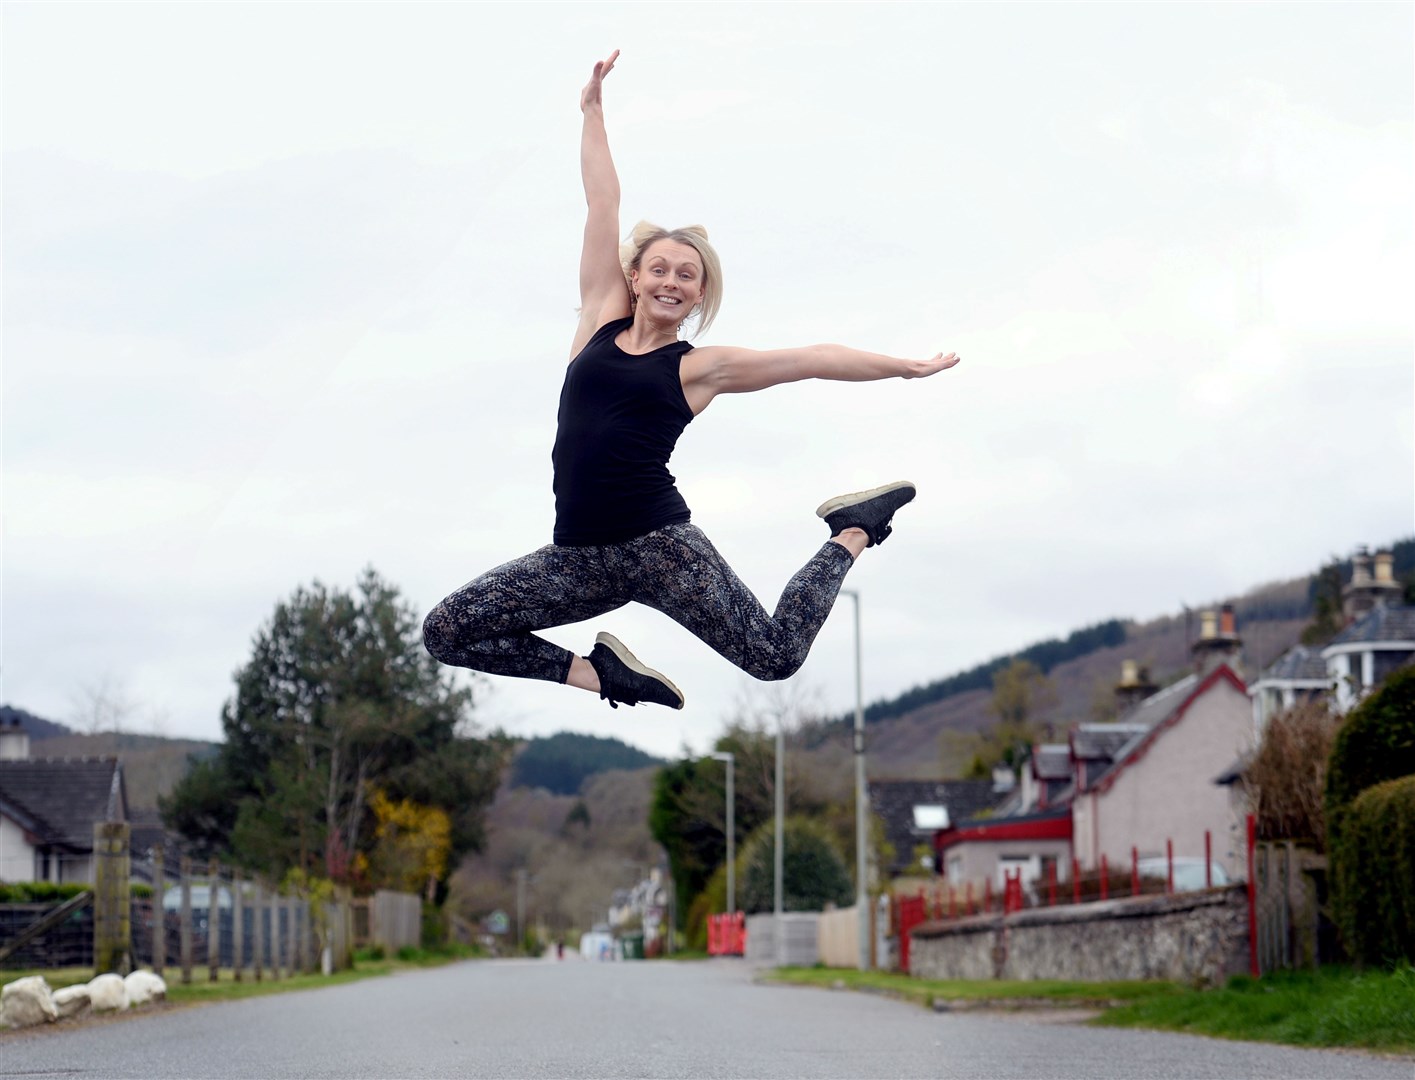 Dancer Sophie Donald is delighted at the success of her online fundraiser.